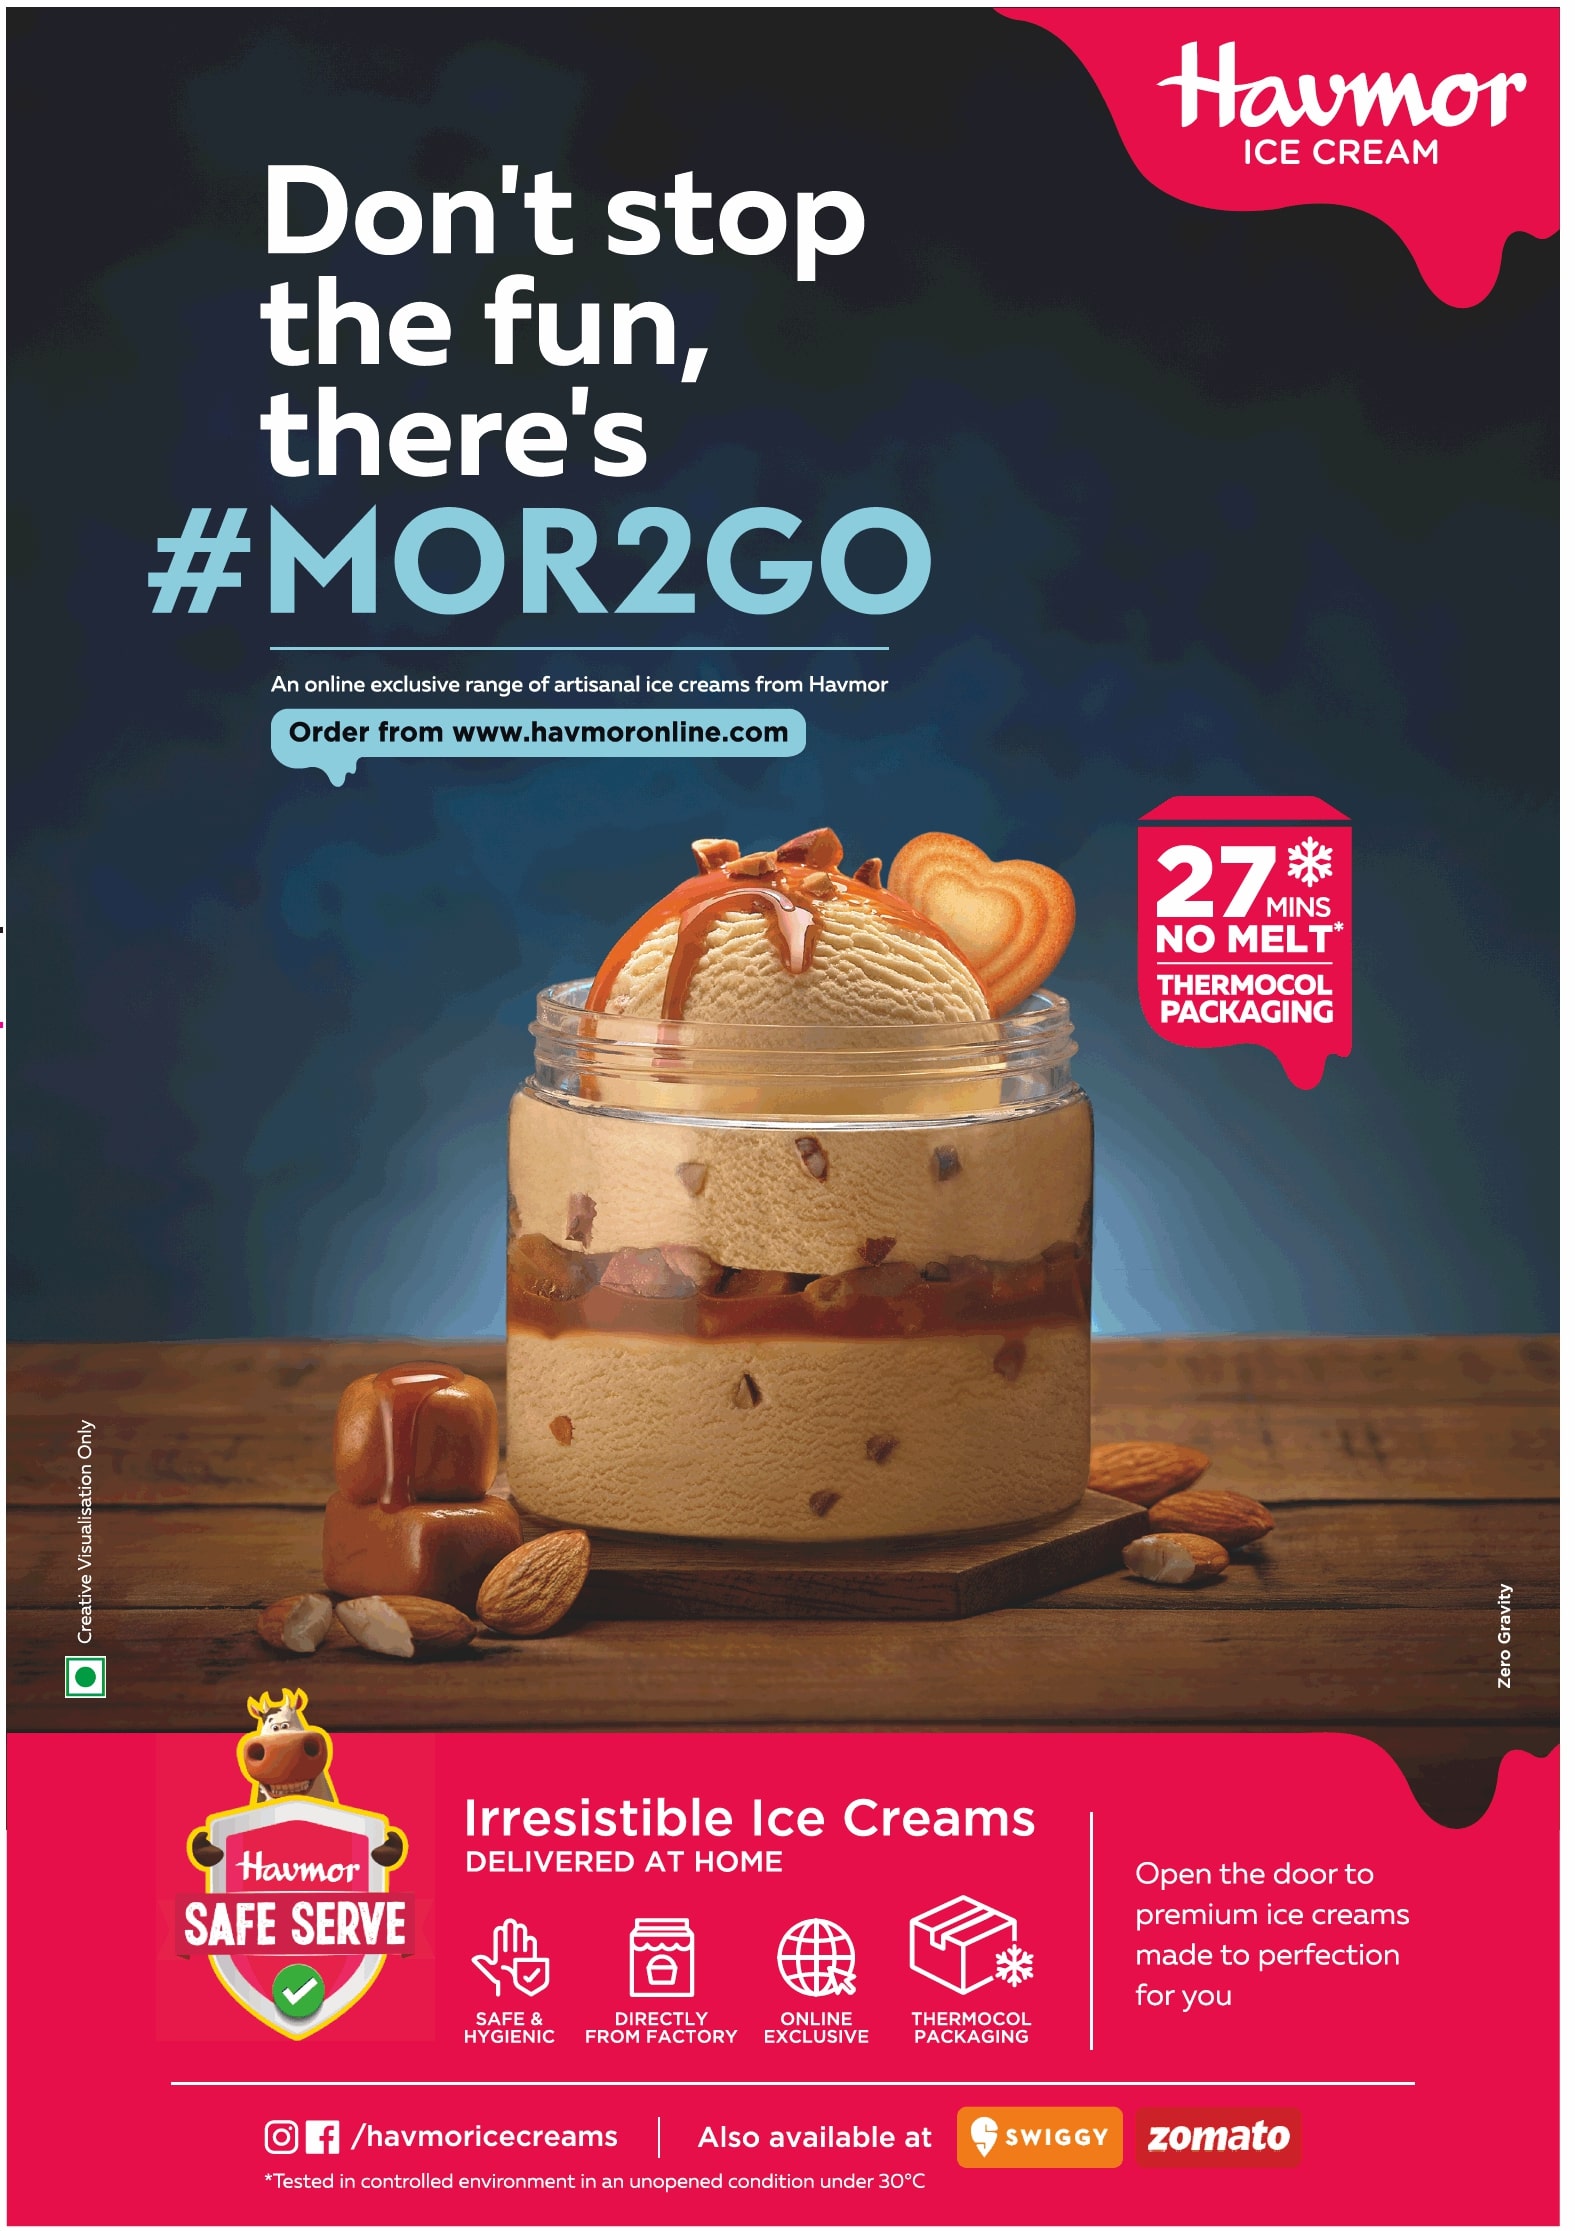 havmor-icecream-mor2go-online-artisanal-ice-creams-27-mins-no-melt-thermocol-packaging-delivered-at-home-ad-toi-ahmedabad-6-11-2020